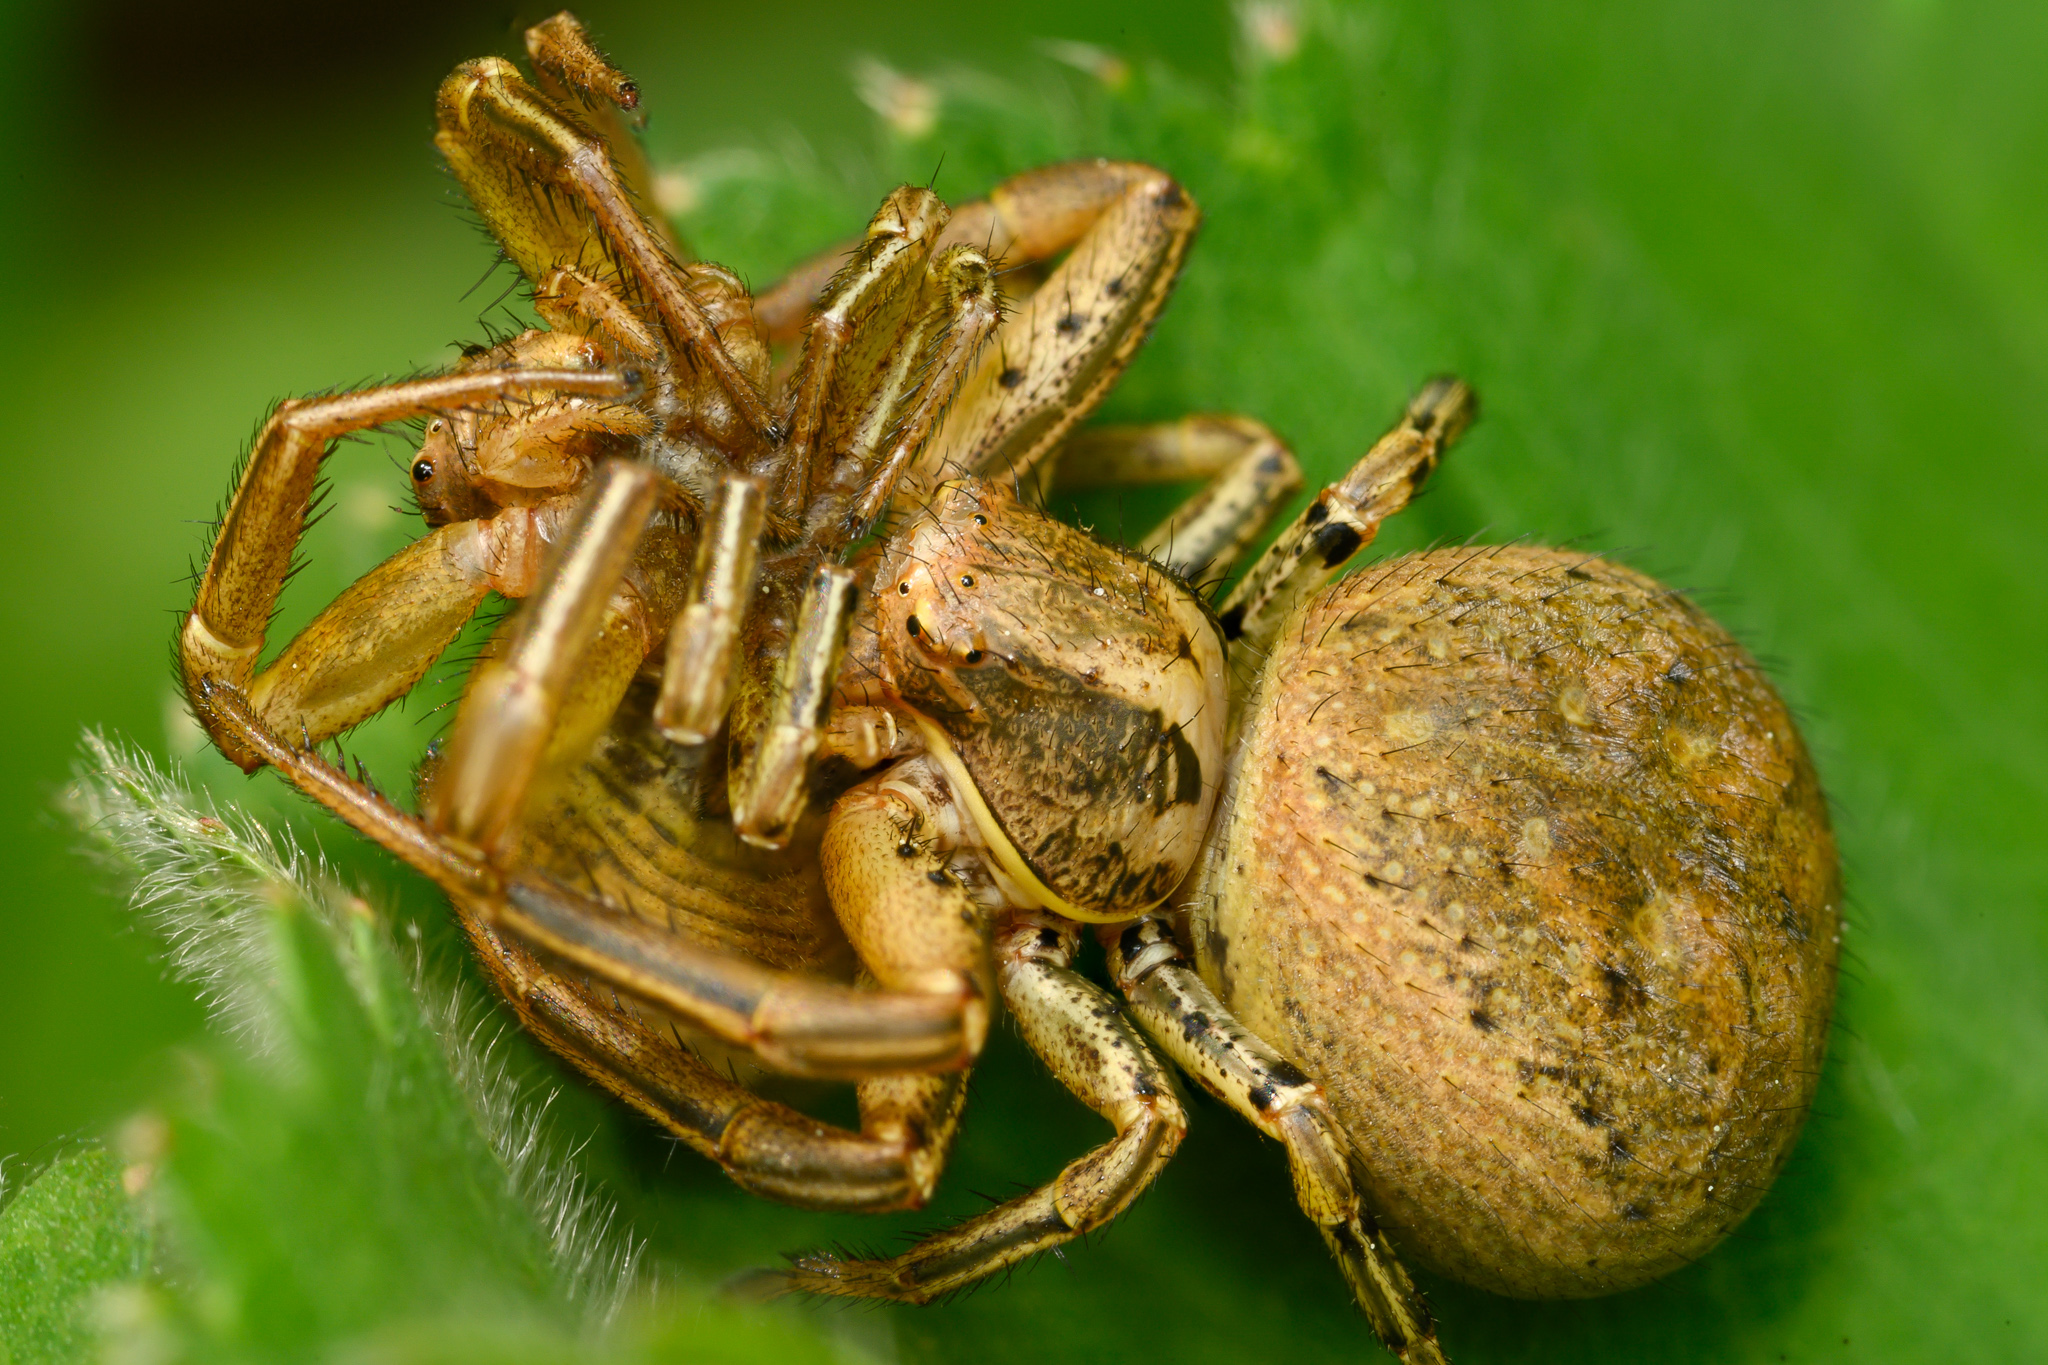 What Do Crab Spiders Eat?